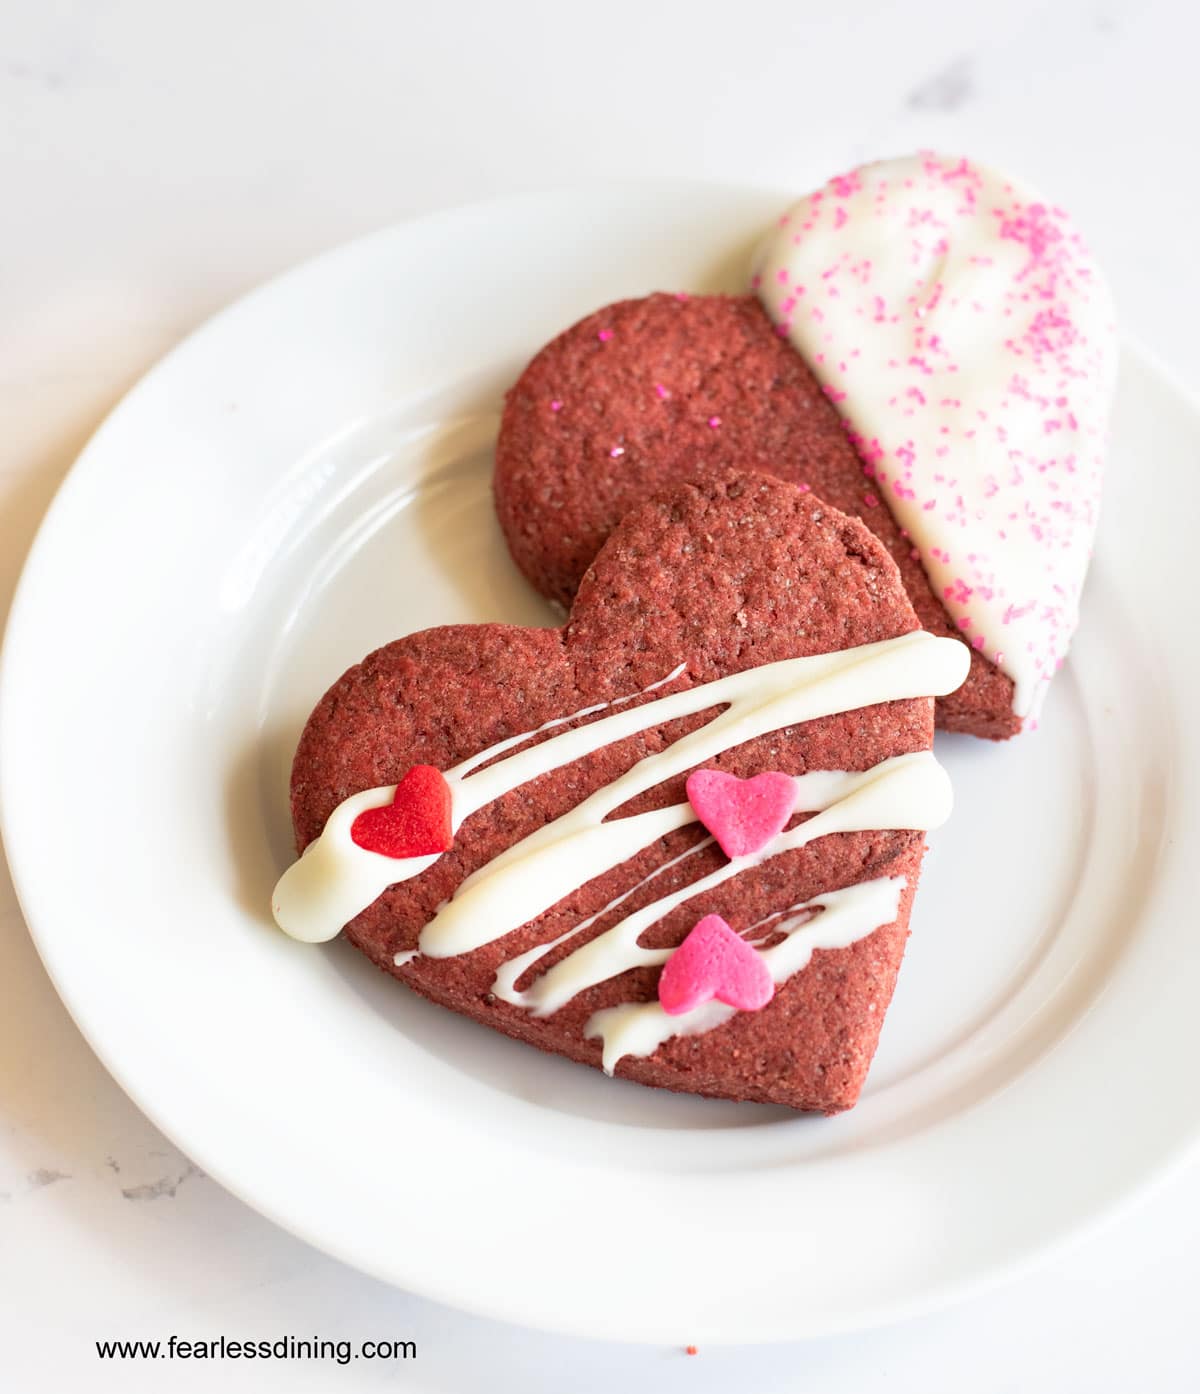 Two decorated heart shaped red velvet cookies on a small white plate.